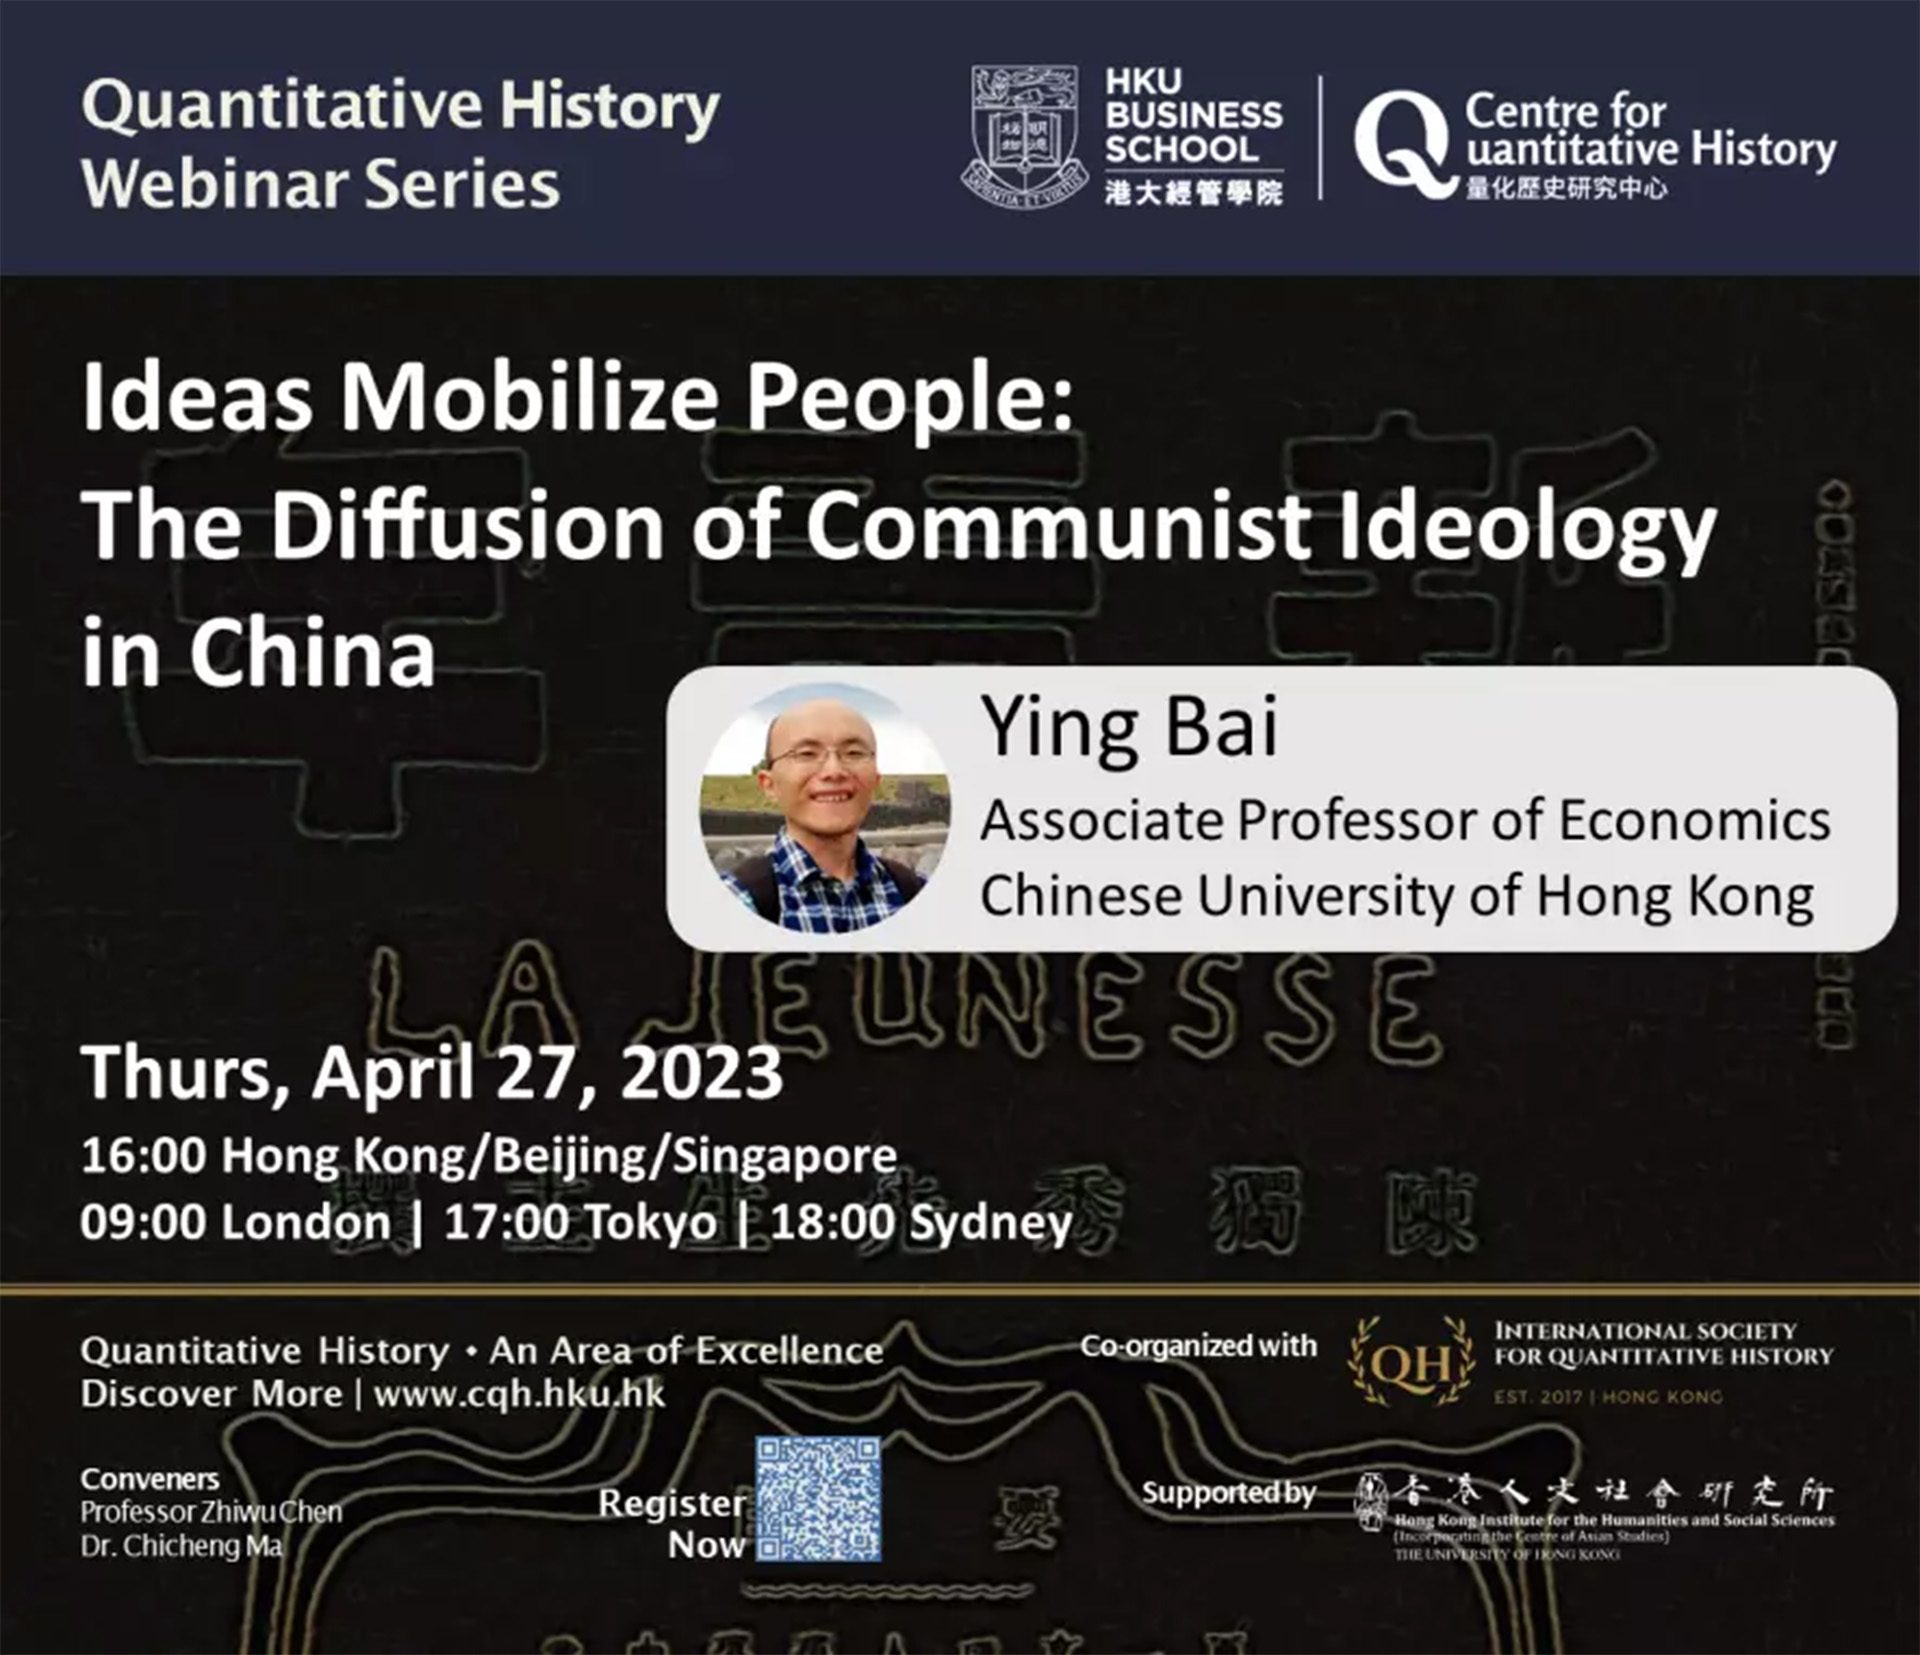 Quantitative History Webinar on “Ideas Mobilize People: The Diﬀusion of Communist Ideology in China” by Dr. Ying Bai (April 27, 2023)